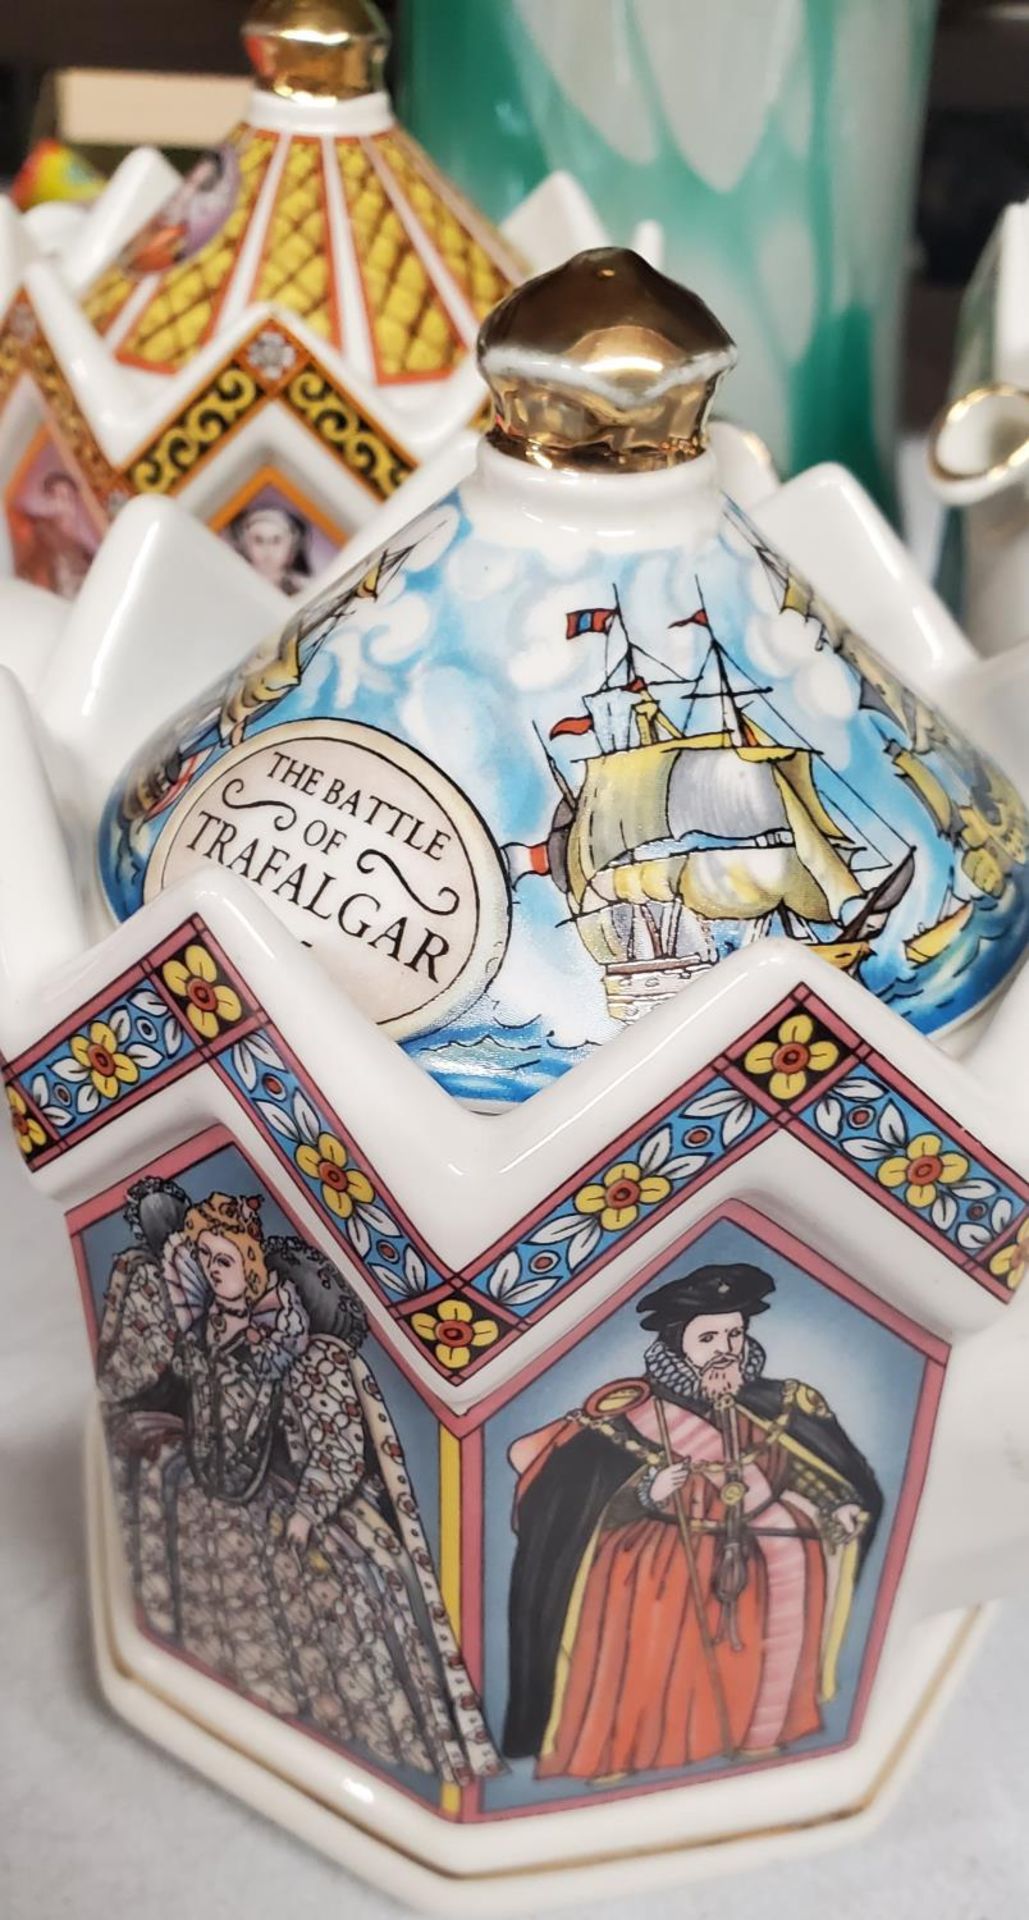 FOUR SADLER TEAPOTS TO INCLUDE ELIZABETH 1, THE DUKE OF WELLINGTON, KING HENRY VIII AND LORD - Image 2 of 3